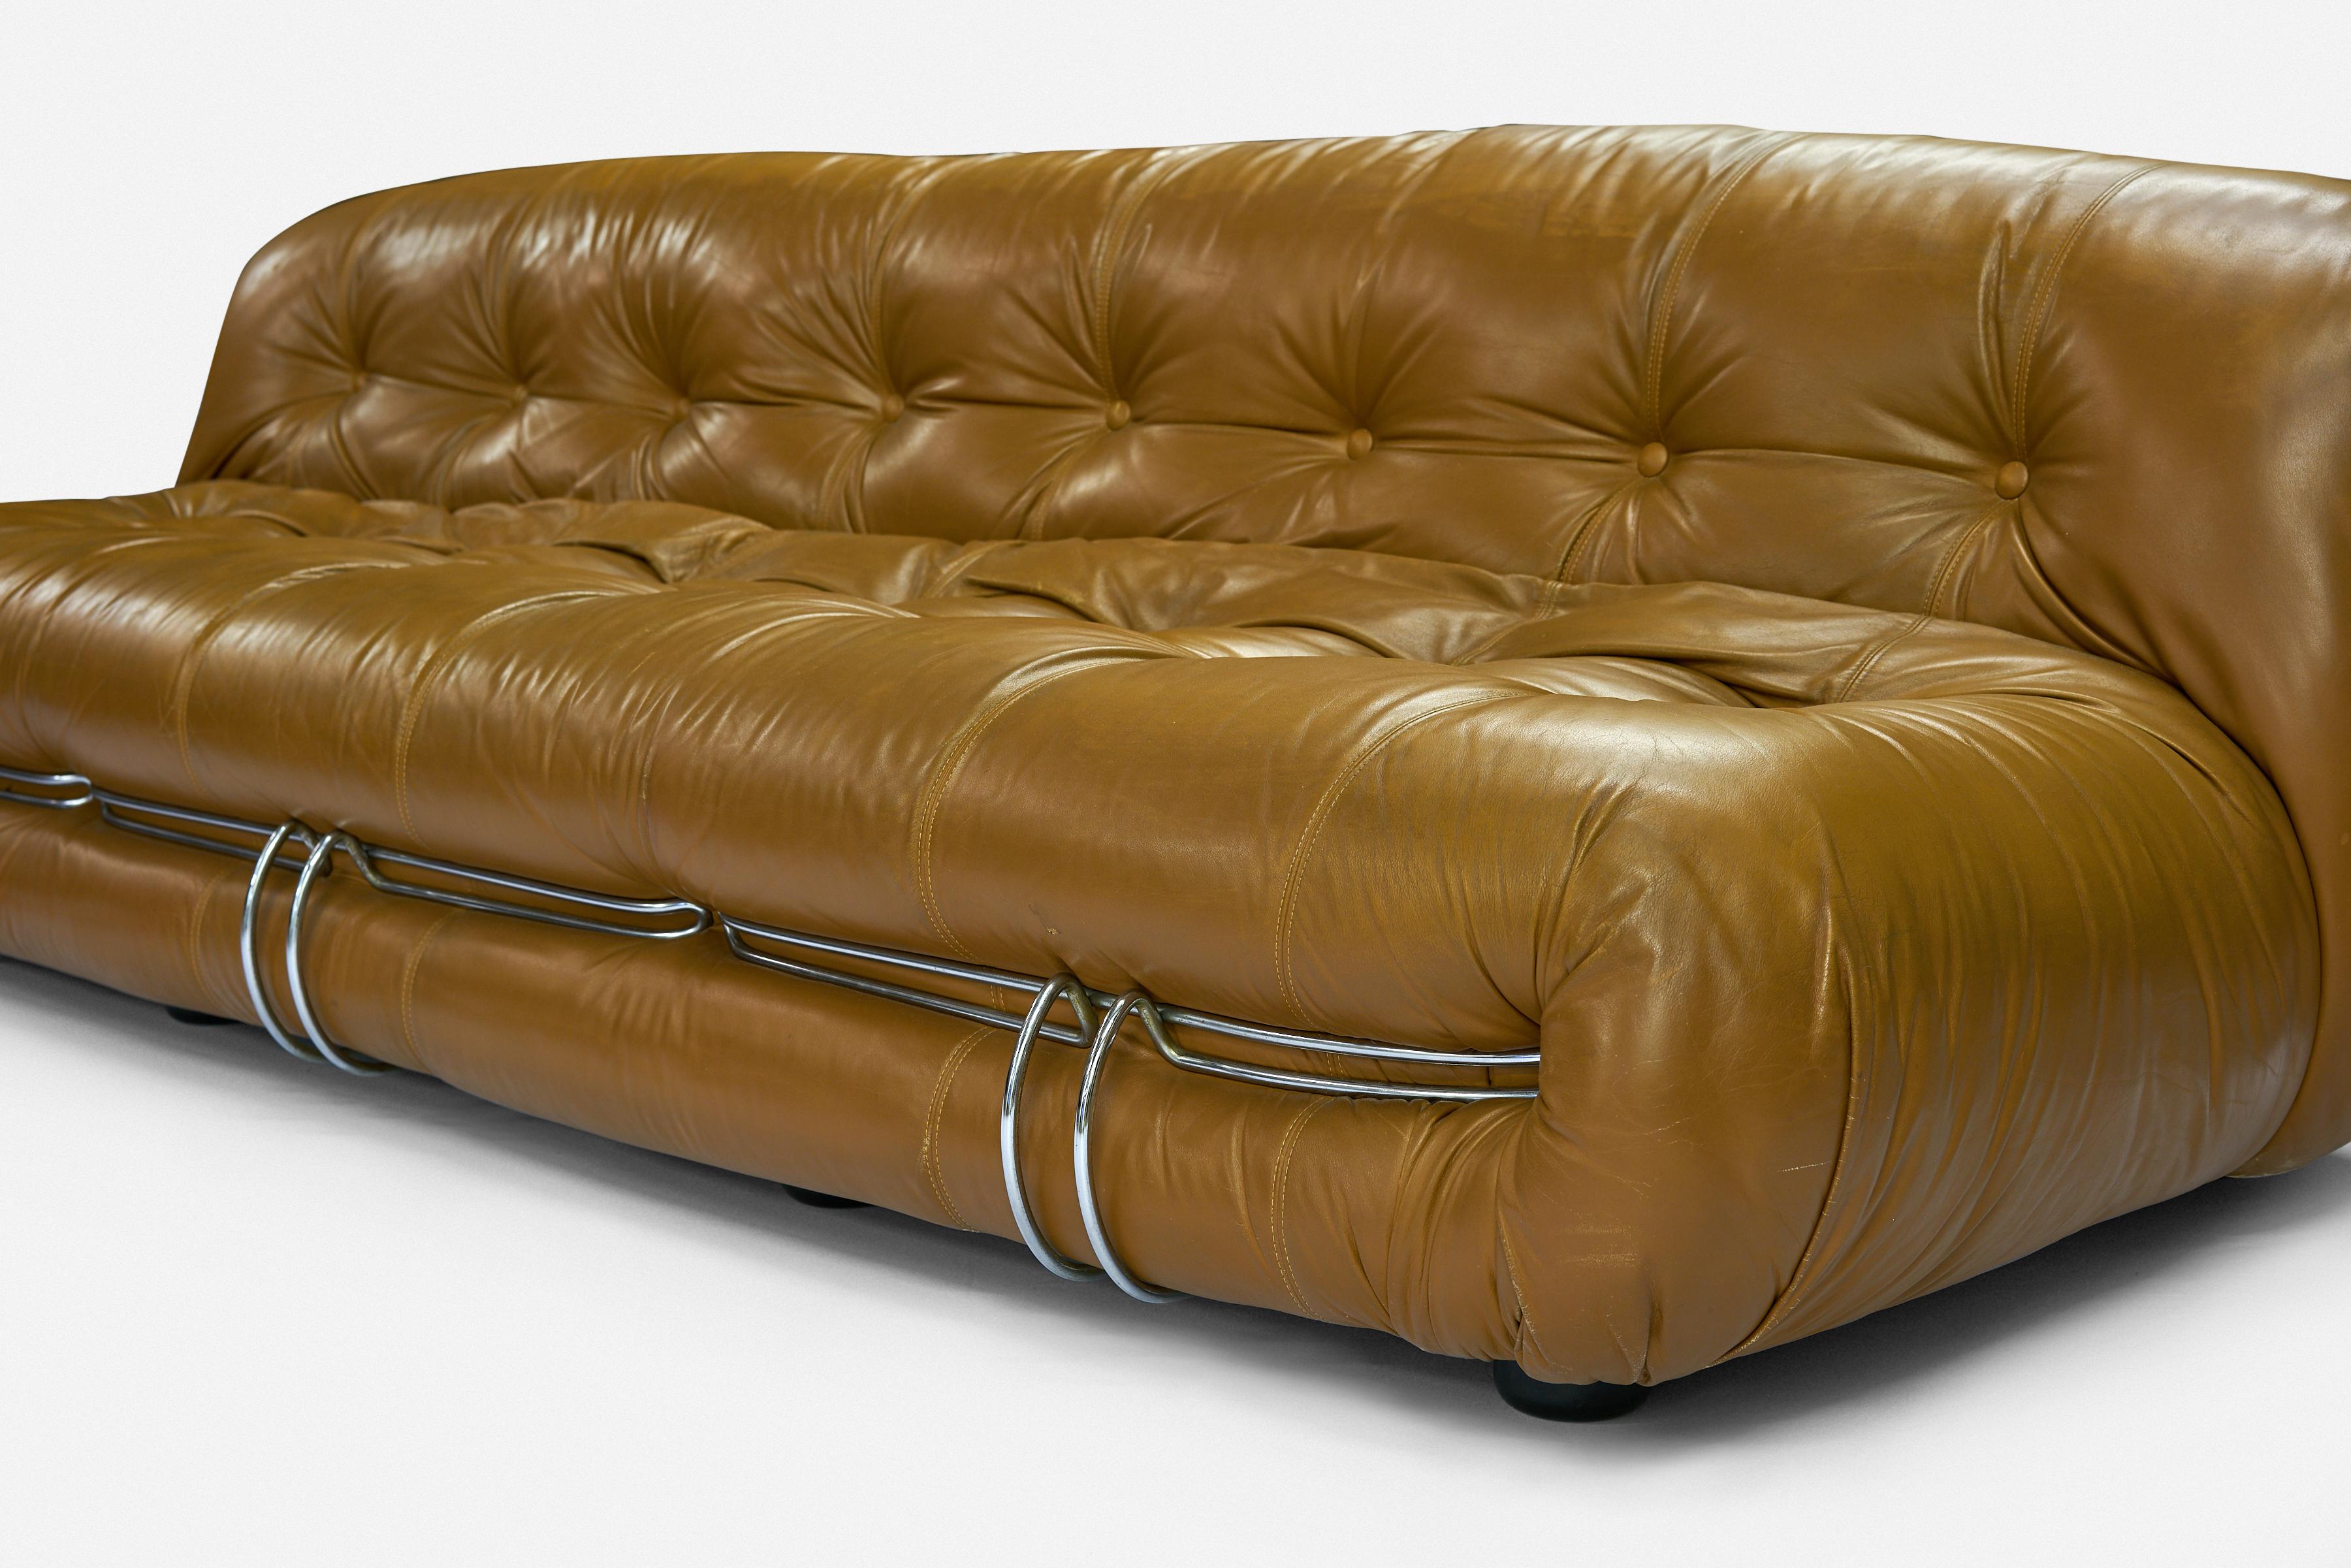 Cassina 'Soriana' Sofa by Afra and Tobia Scarpa in Original Leather In Good Condition For Sale In Houston, TX